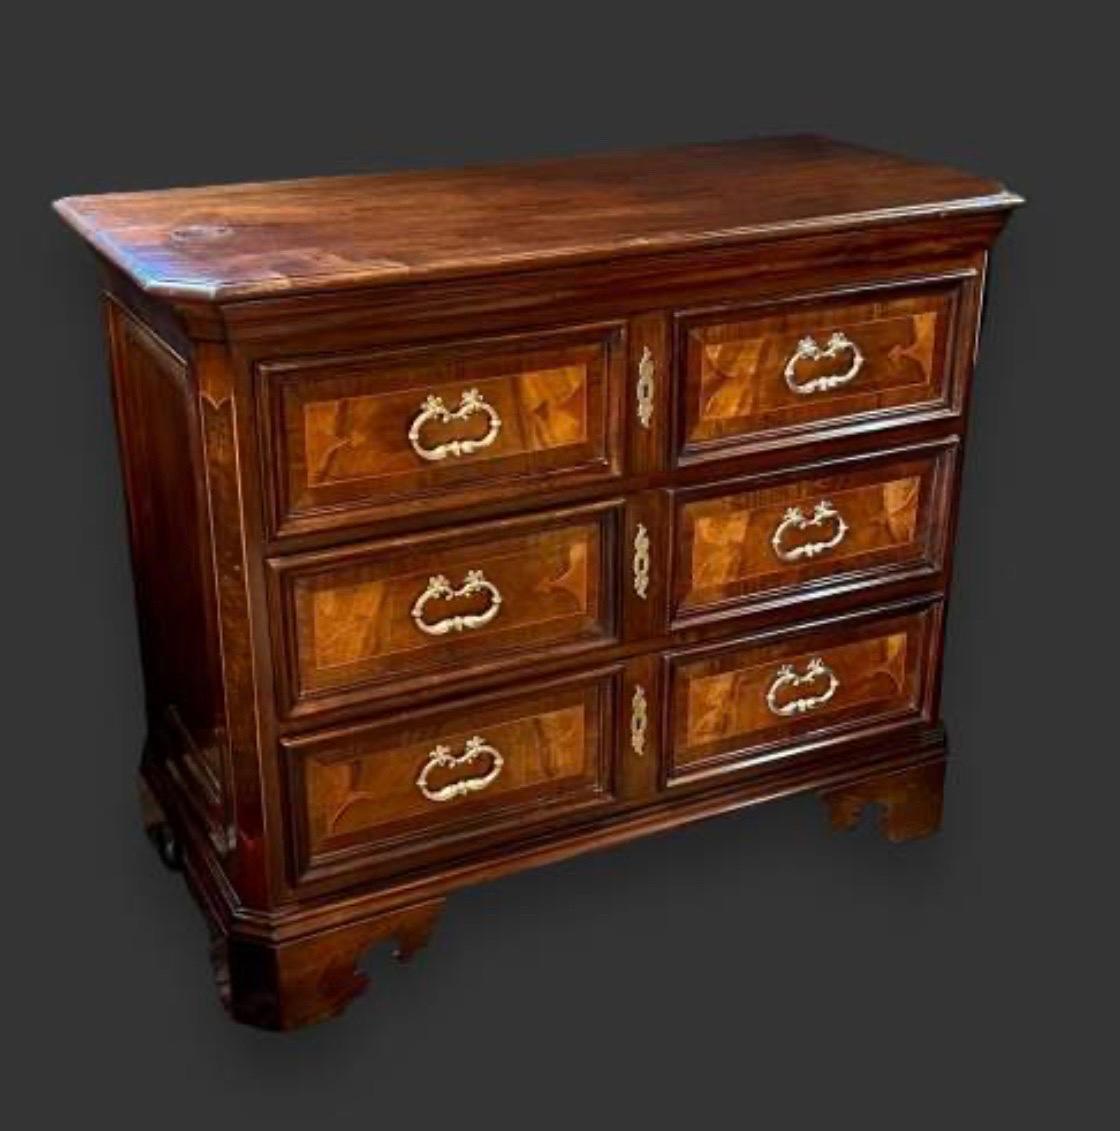  A Large 18th Century Northern Italian Chest of Drawers  For Sale 5